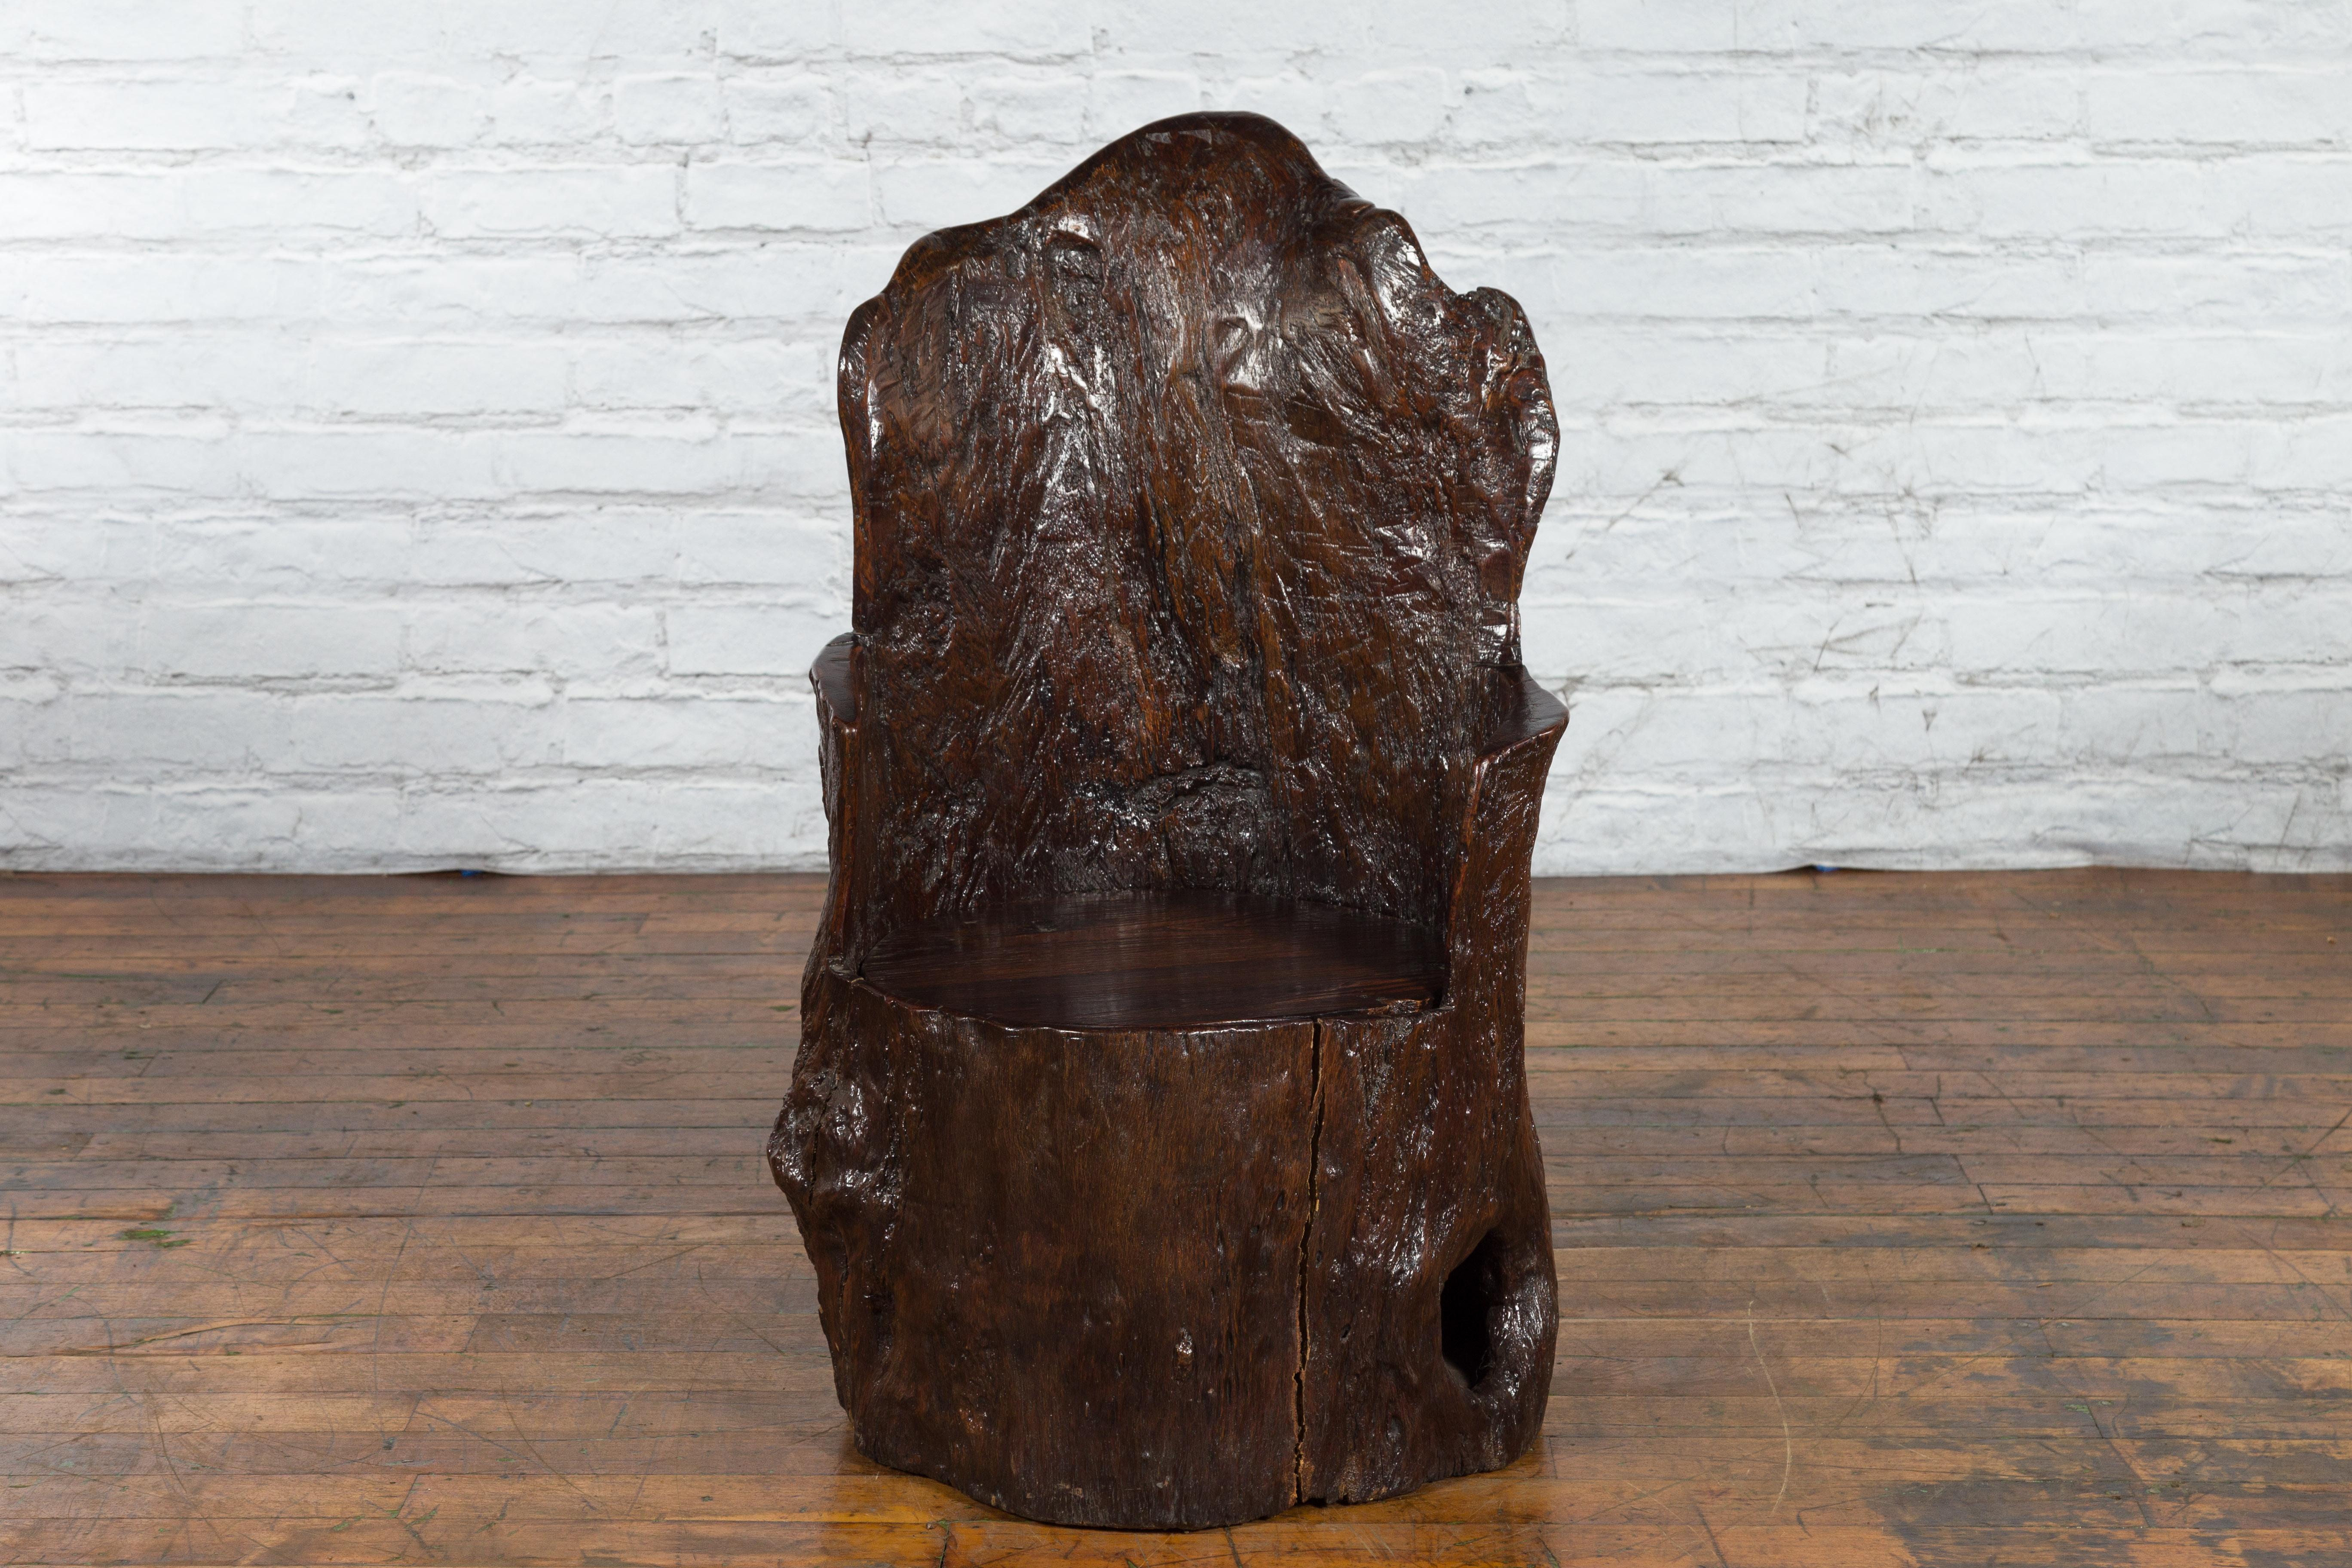 Chinese Rustic Cantonese Armchair Carved from a Tree Trunk with Hidden Compartment